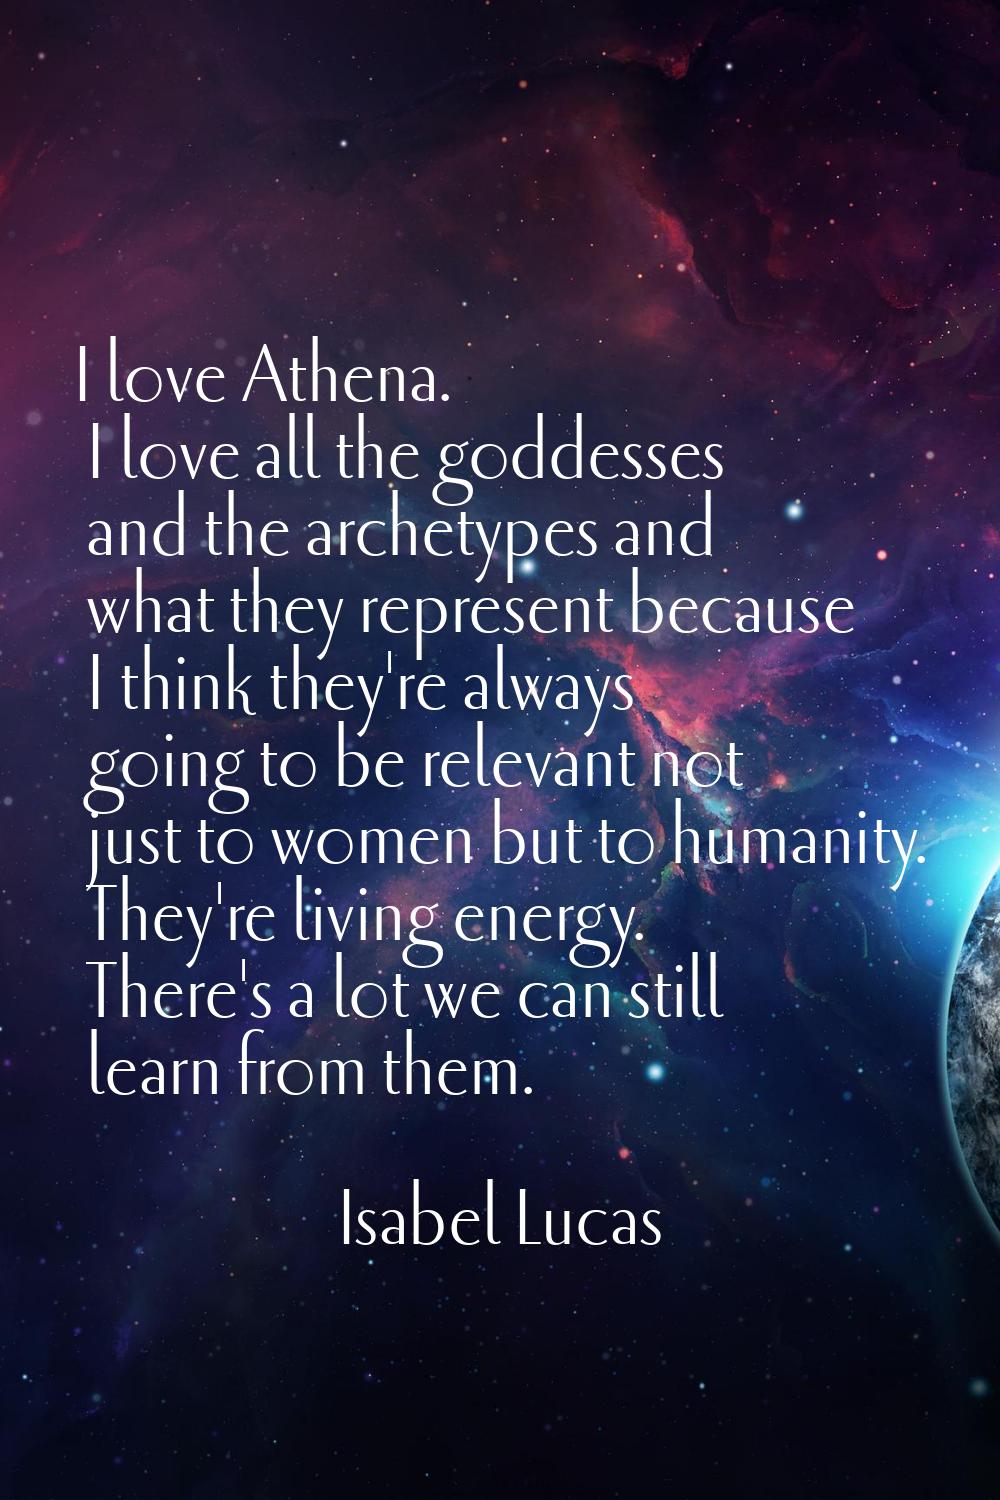 I love Athena. I love all the goddesses and the archetypes and what they represent because I think 